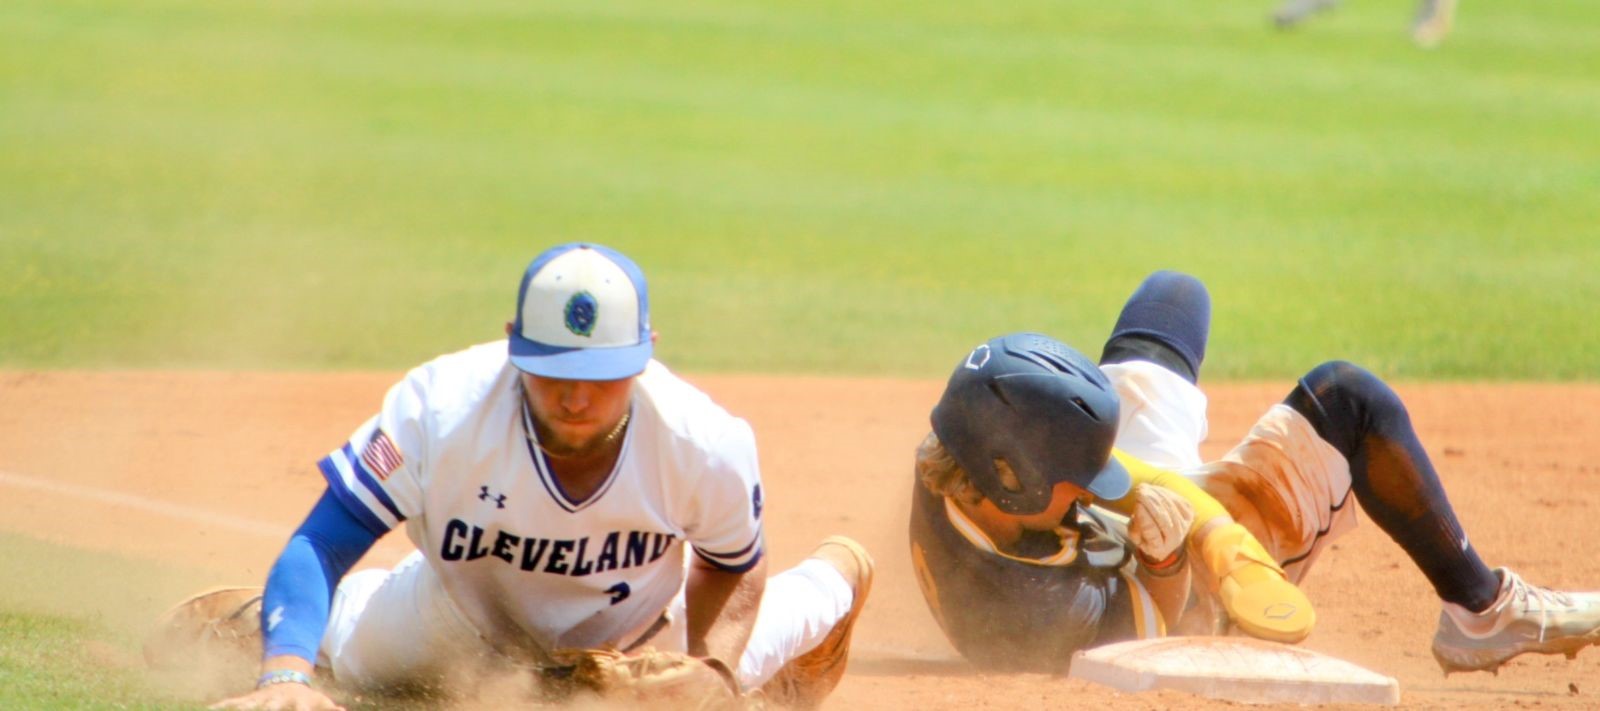 Gaston College's Trent Murchison slides into third base for a stolen base during Sunday's win at Cleveland Community College.